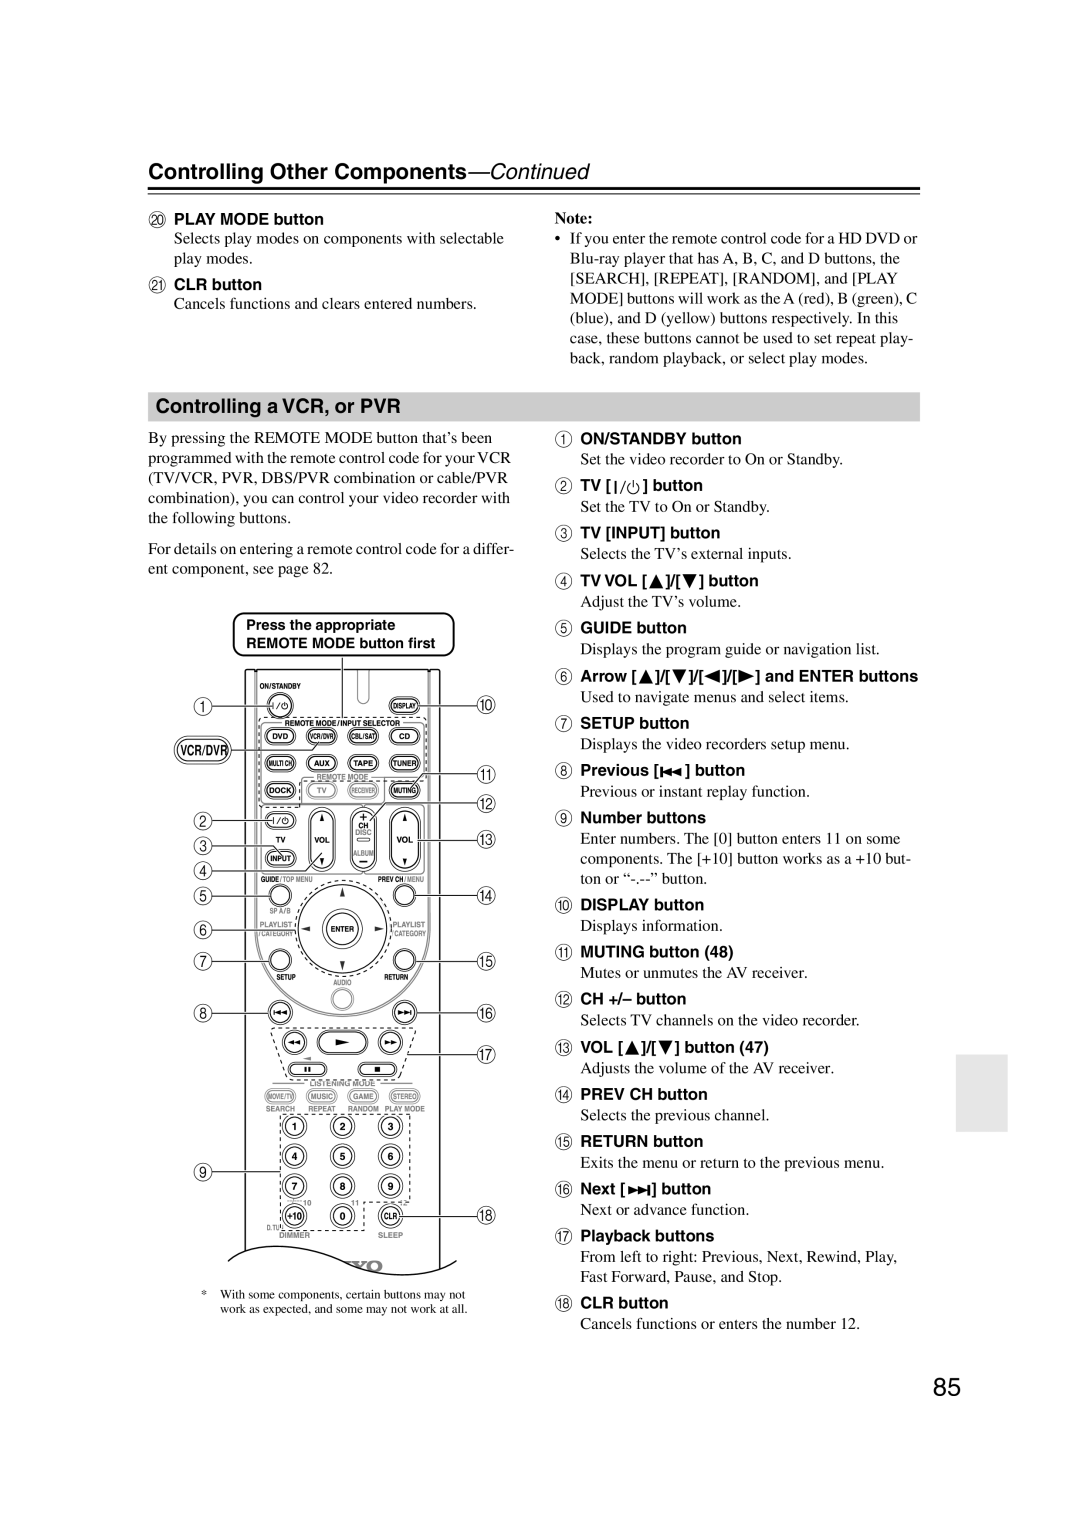 Onkyo HT-S5100 instruction manual Controlling a VCR, or PVR, Controlling Other Components—Continued 